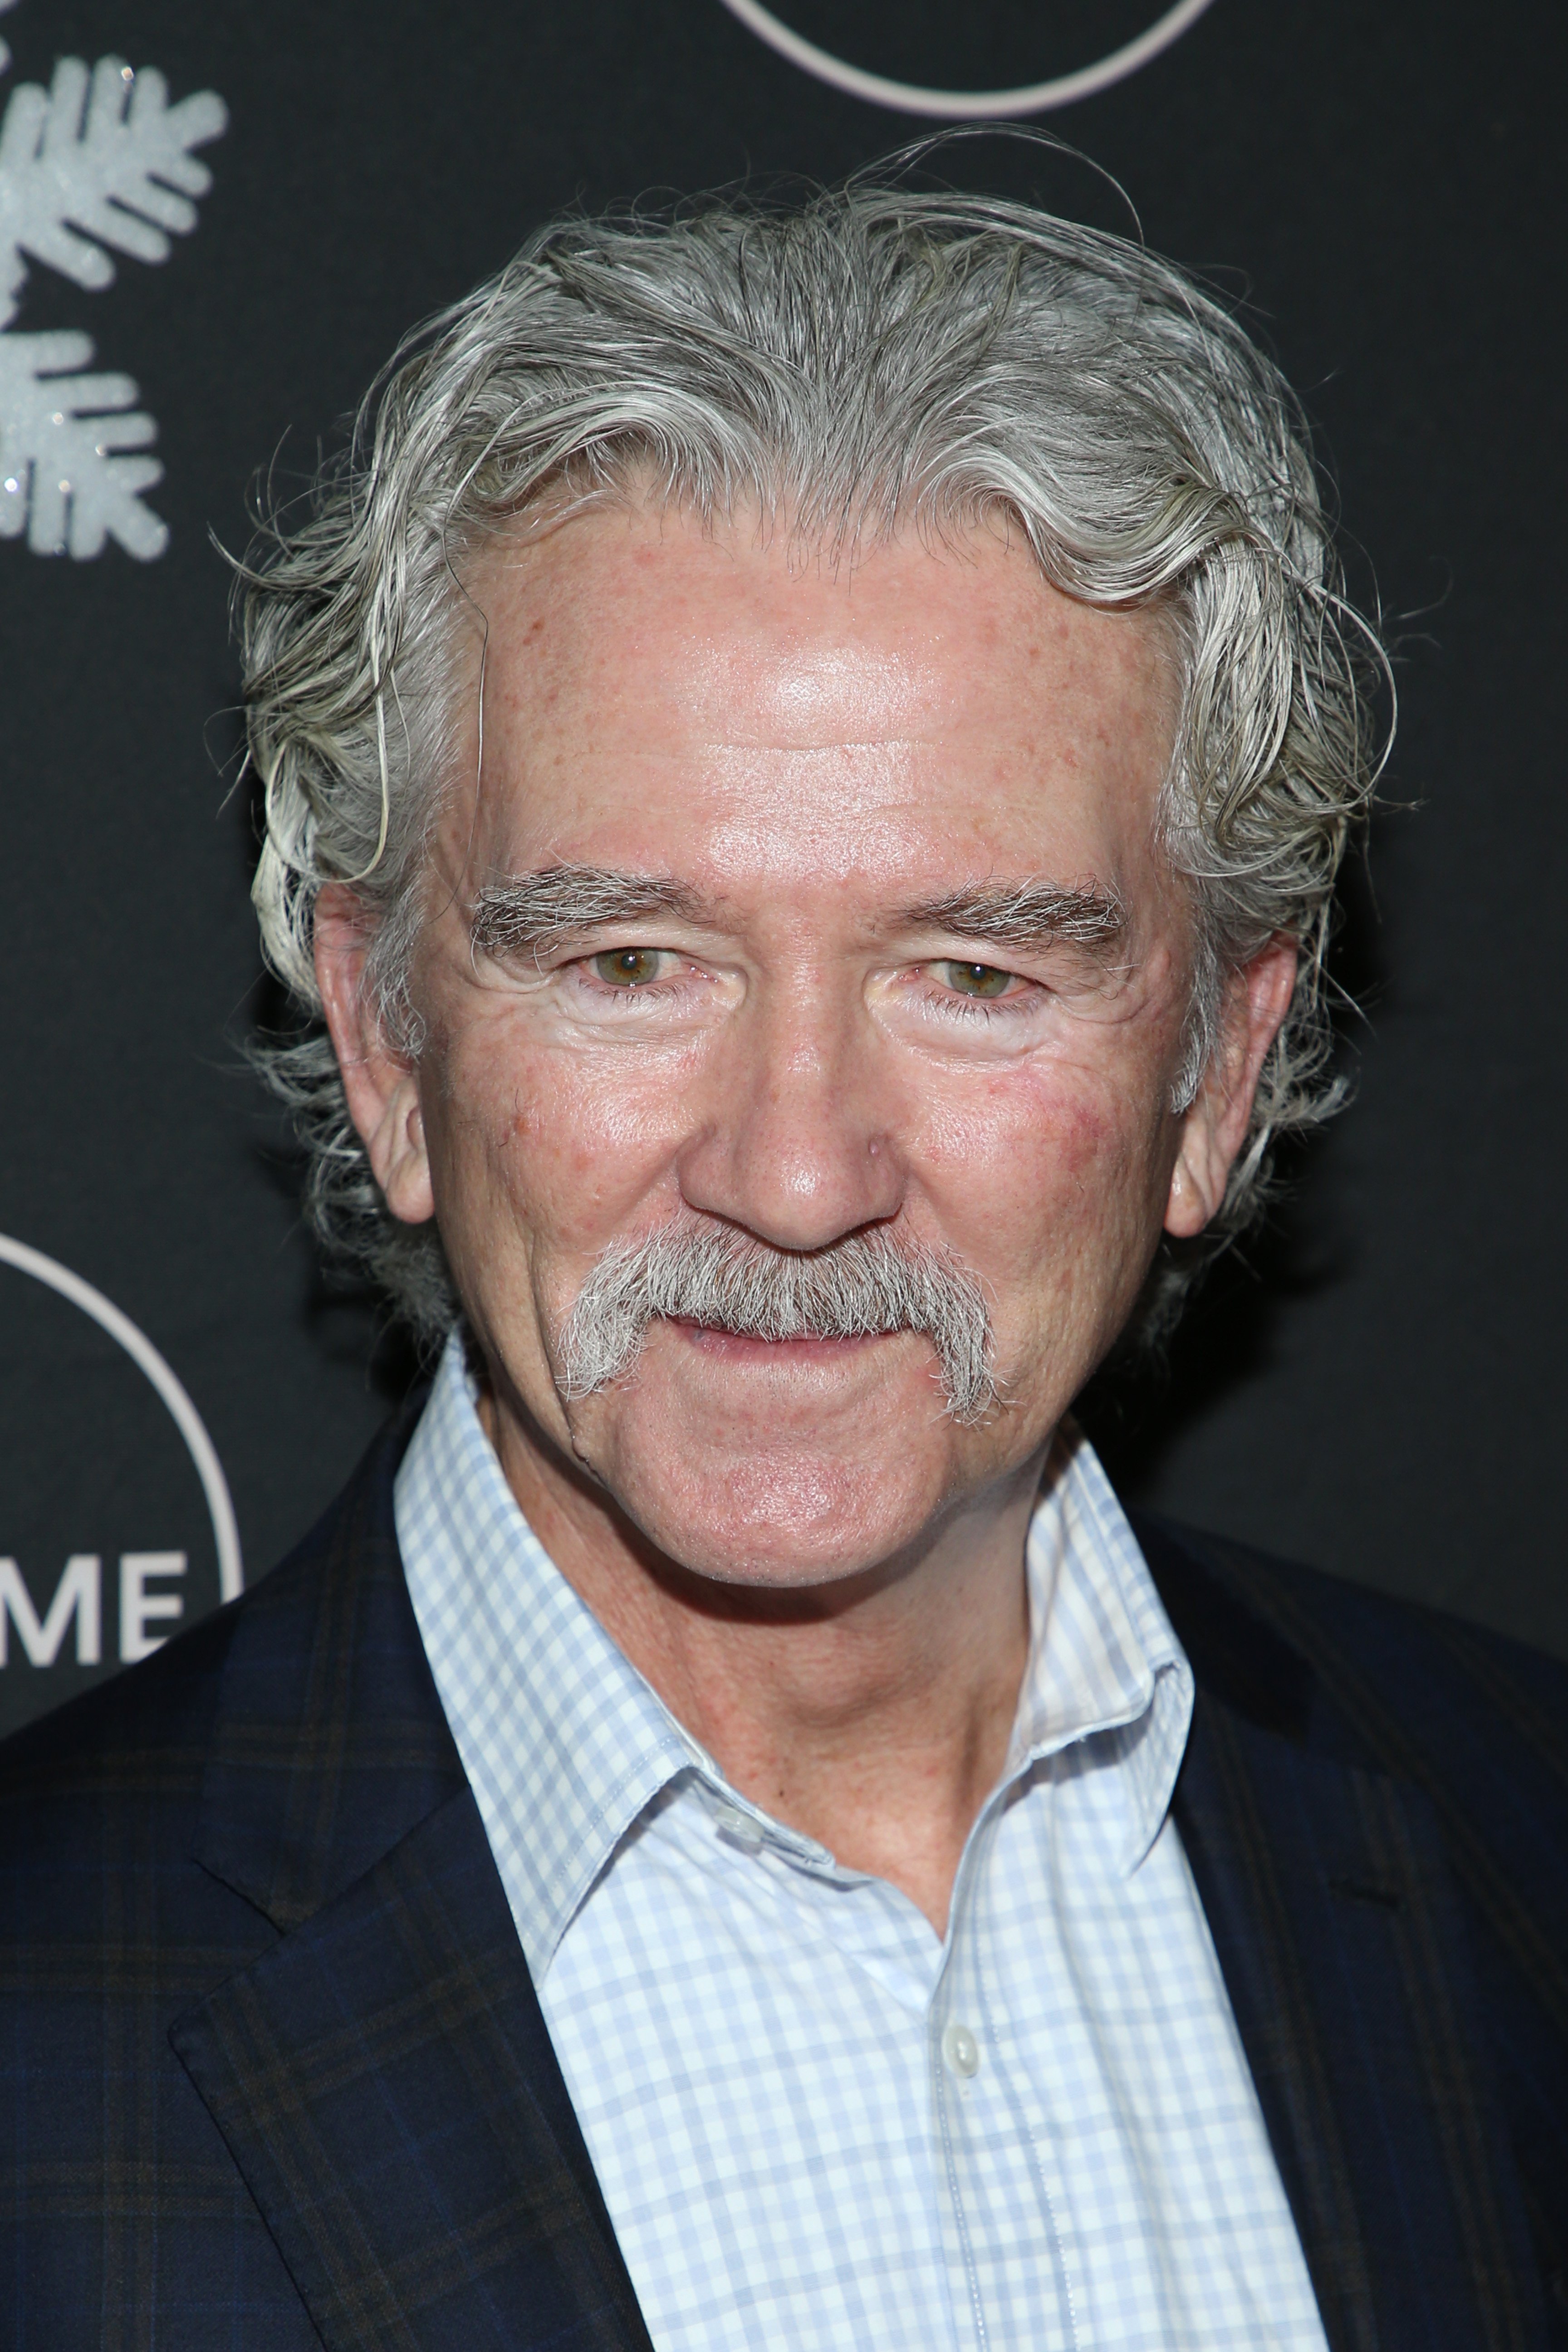 Patrick Duffy attends "It's a wonderful life" Holiday Party at STK Los Angeles on October 22, 2019 in Los Angeles, California.  |  Source: Getty Images